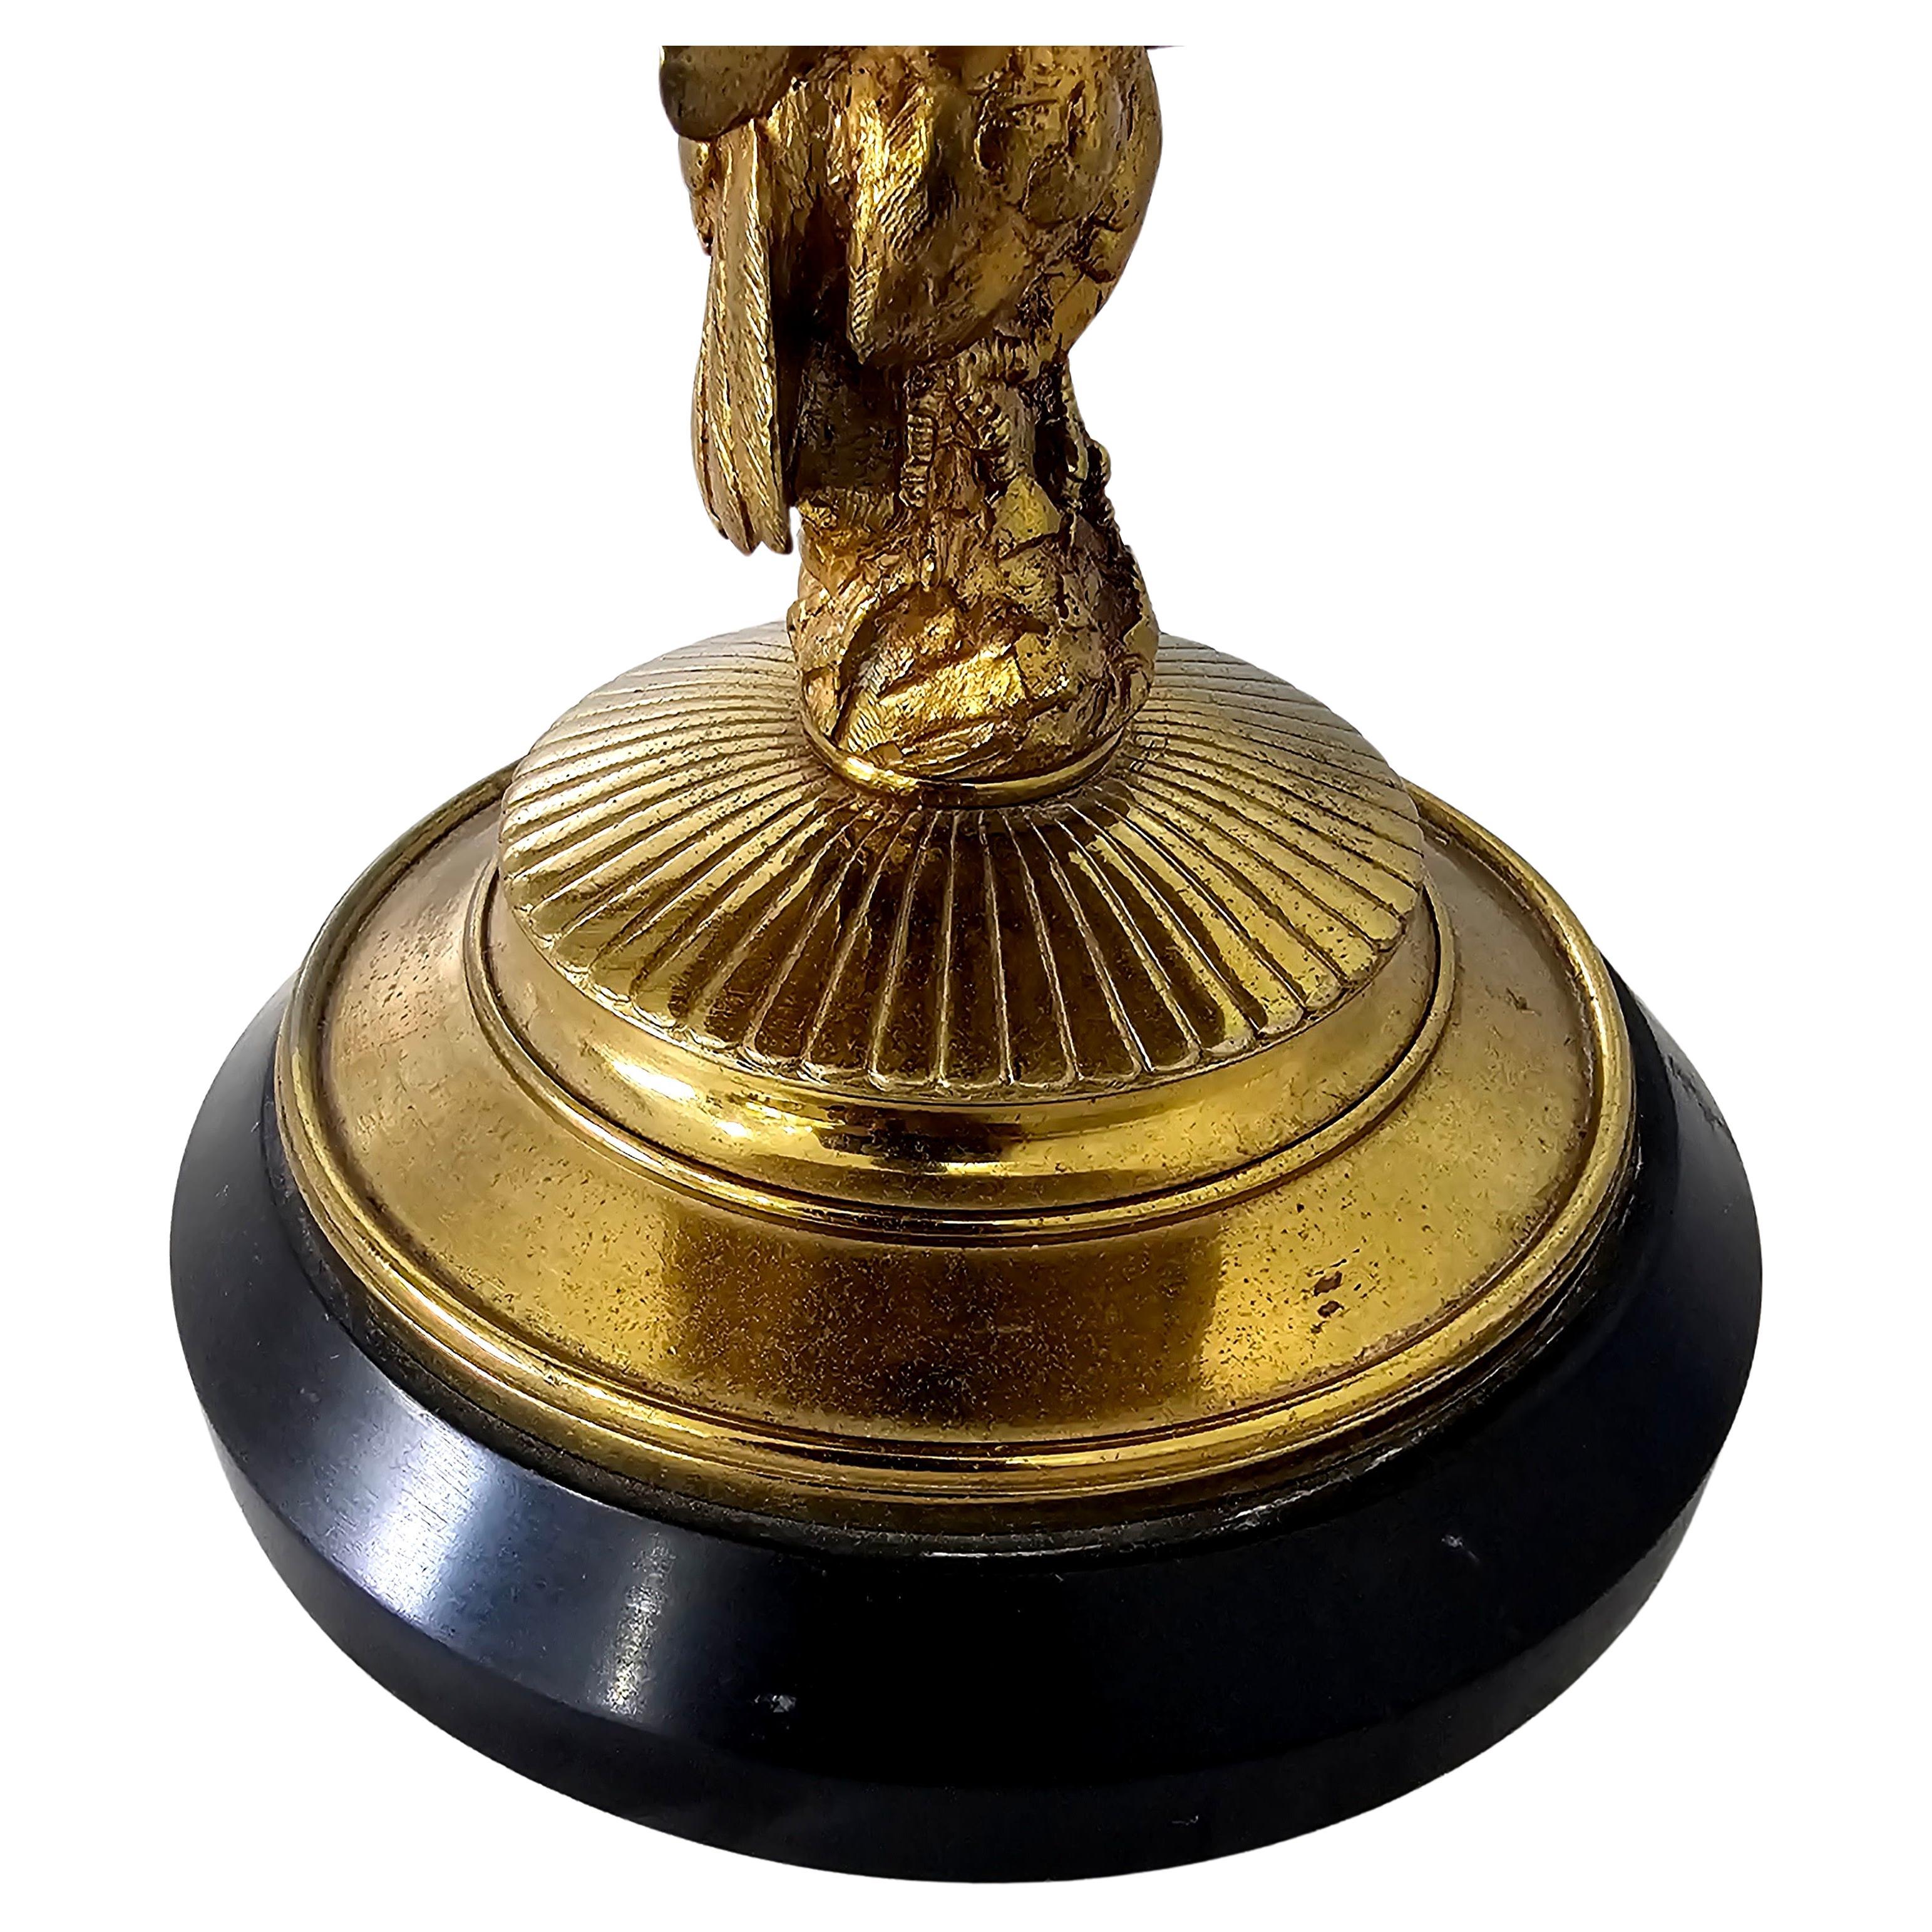 19th C. Renaissance Gilt Bronze Sculptural Tazza Signed E. Cana 1845-1895 French For Sale 5